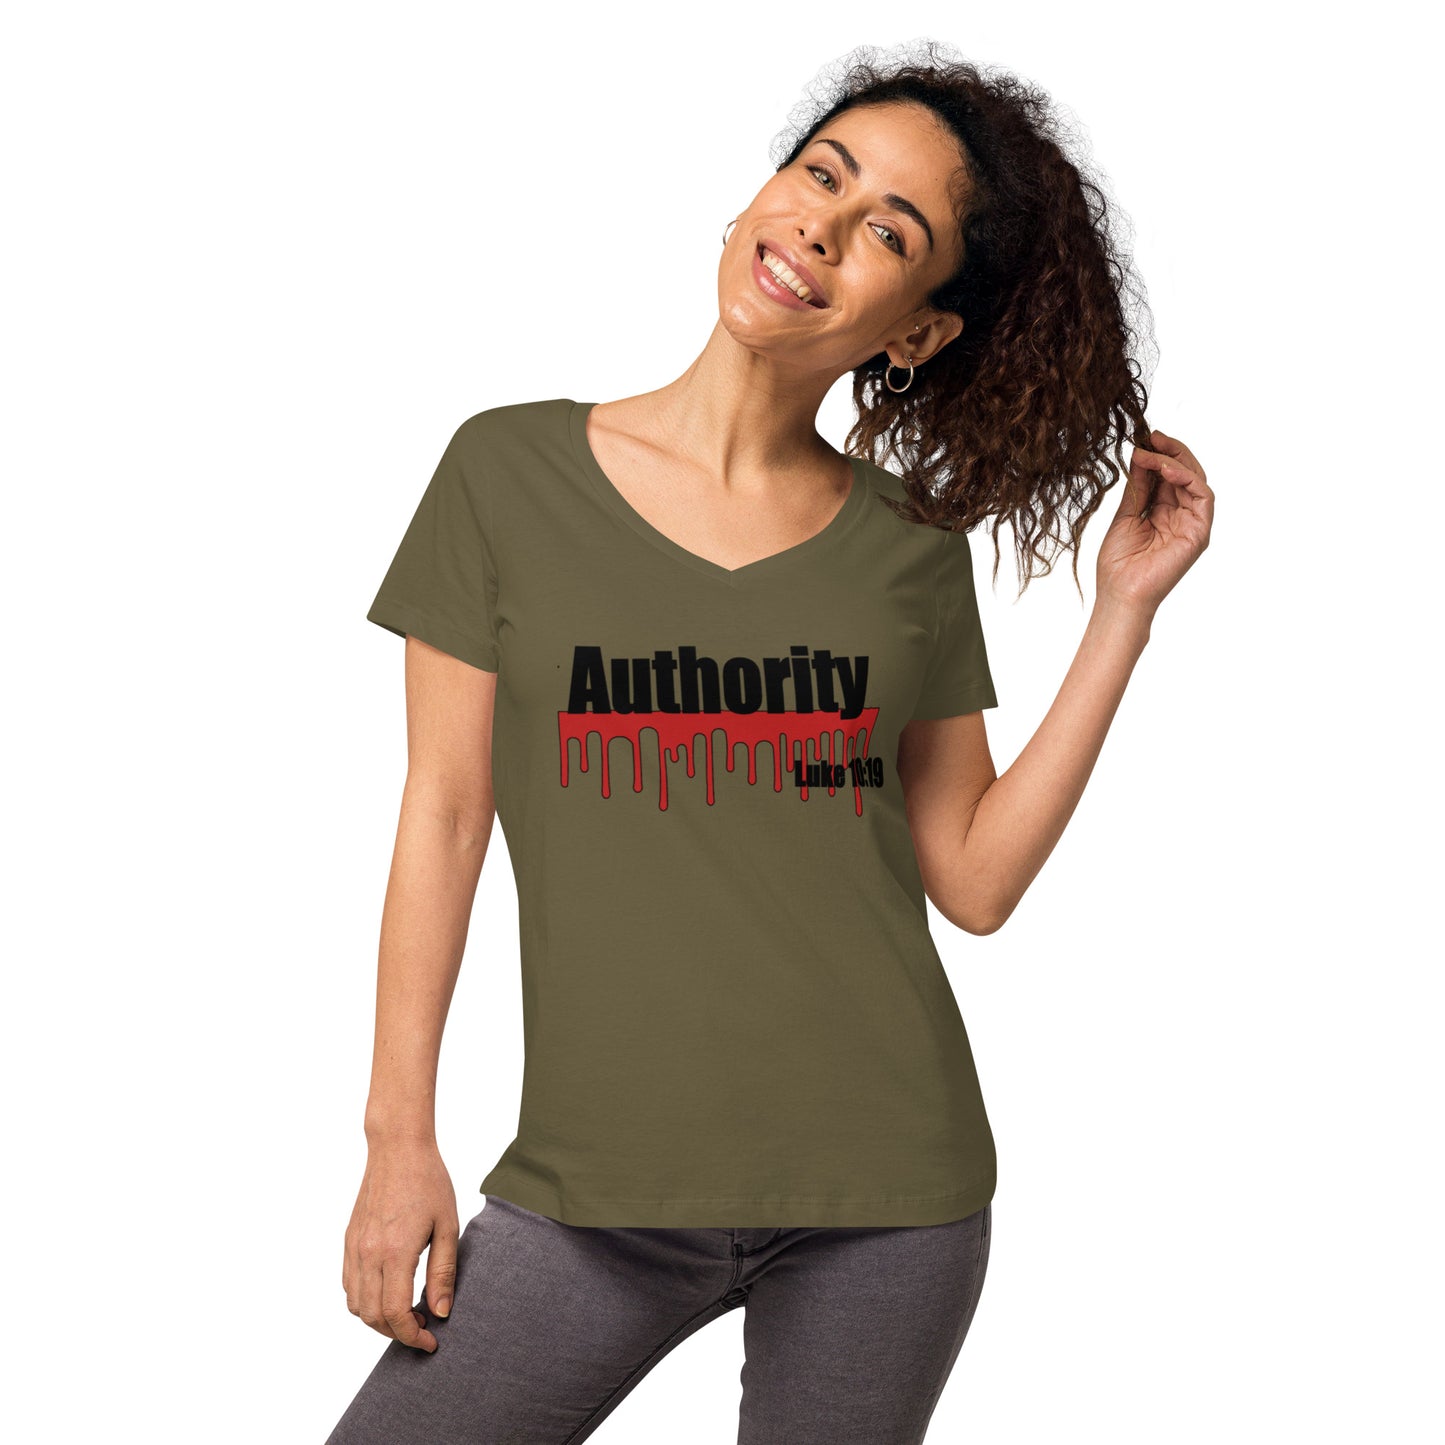 Authority Women’s fitted v-neck t-shirt